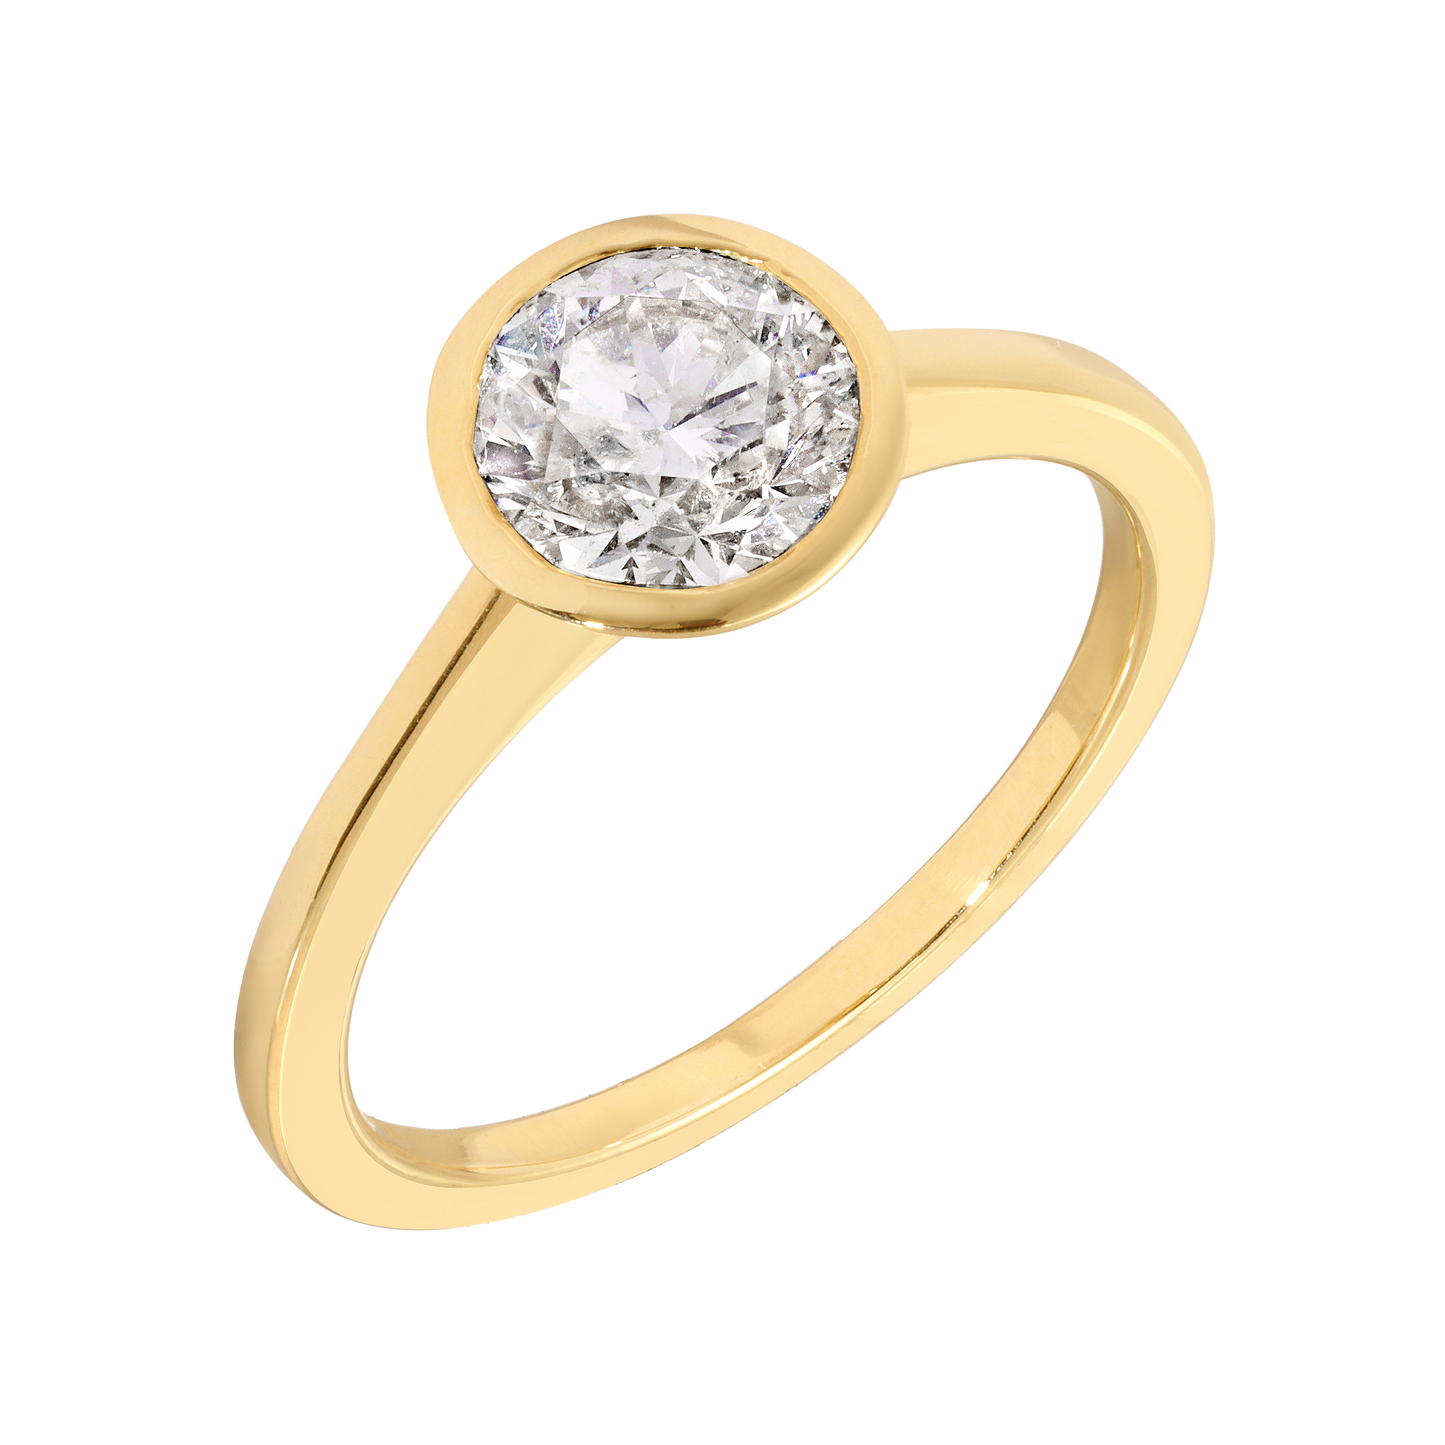 The Solitaire Ring